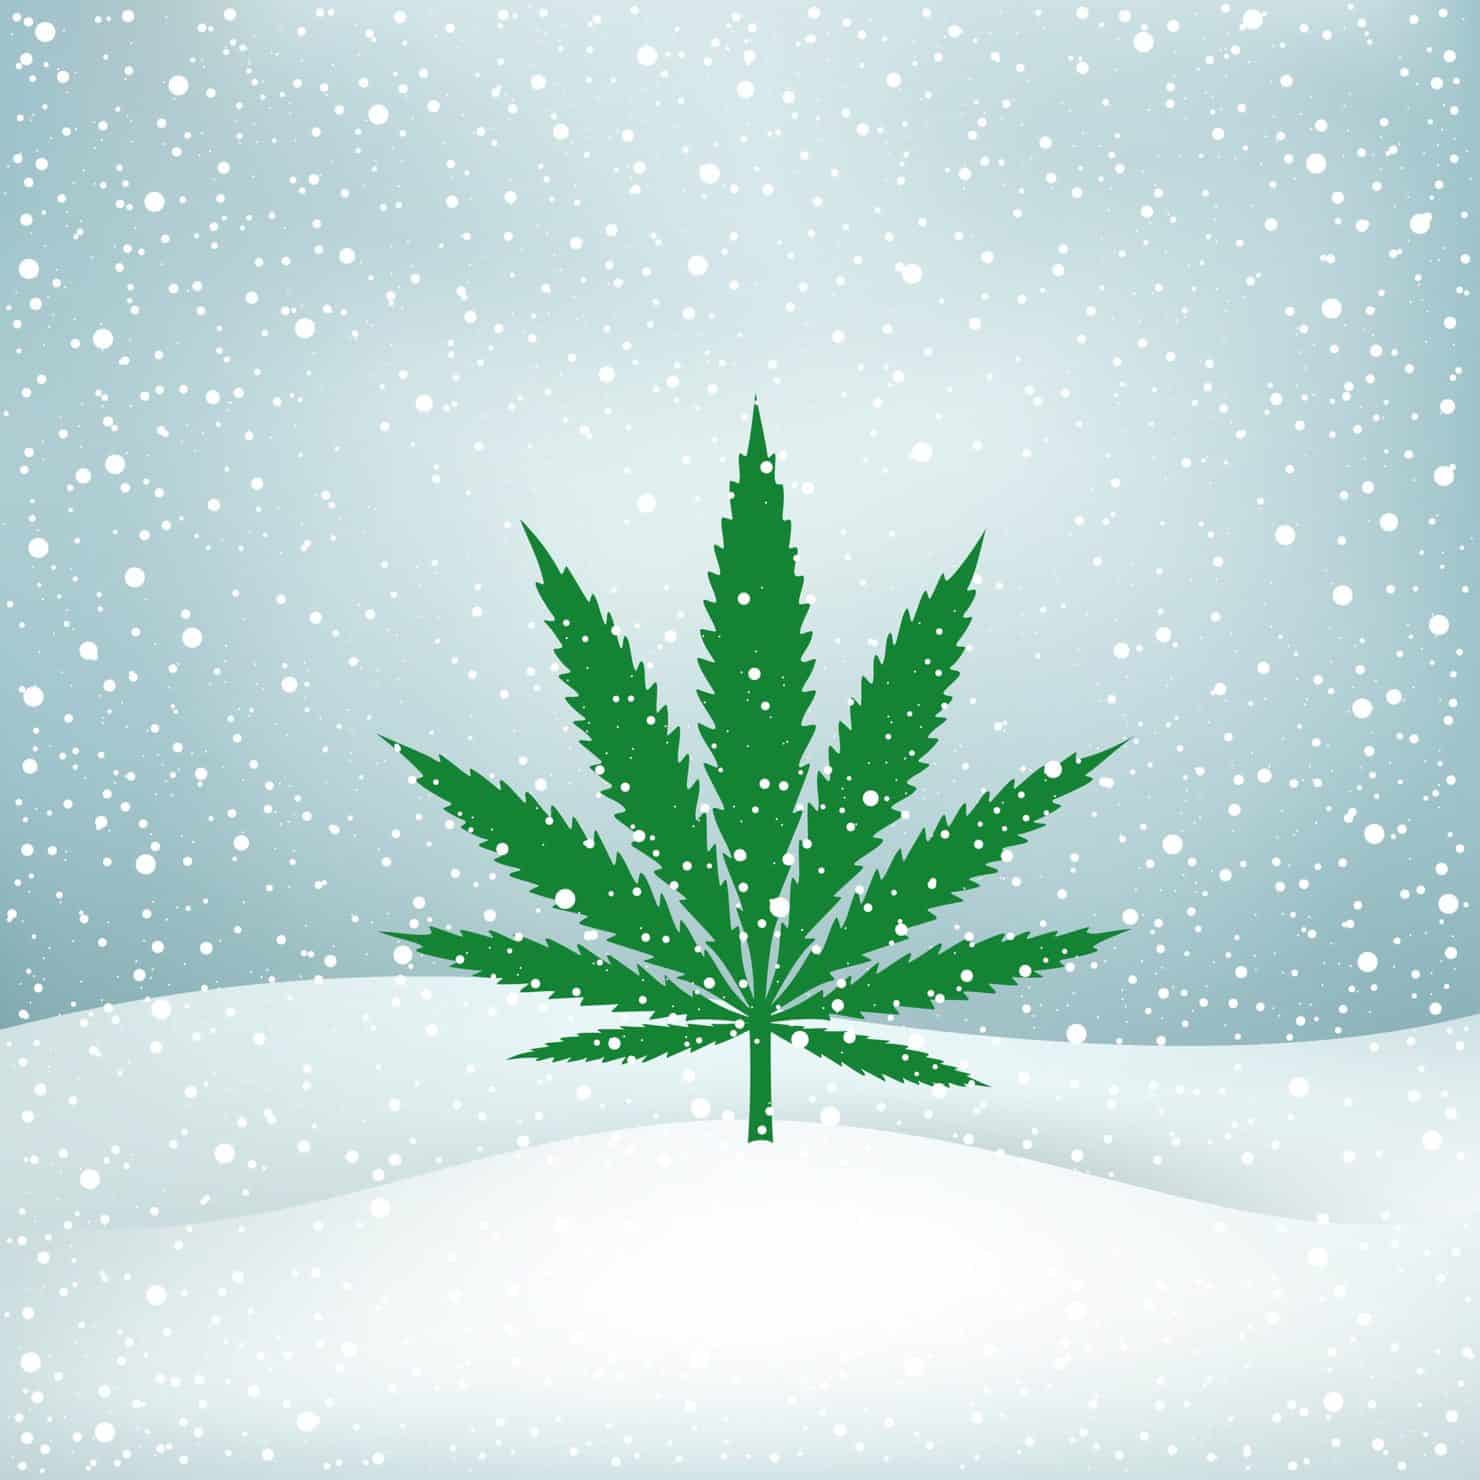 Growing Healthy Cannabis Through The Winter